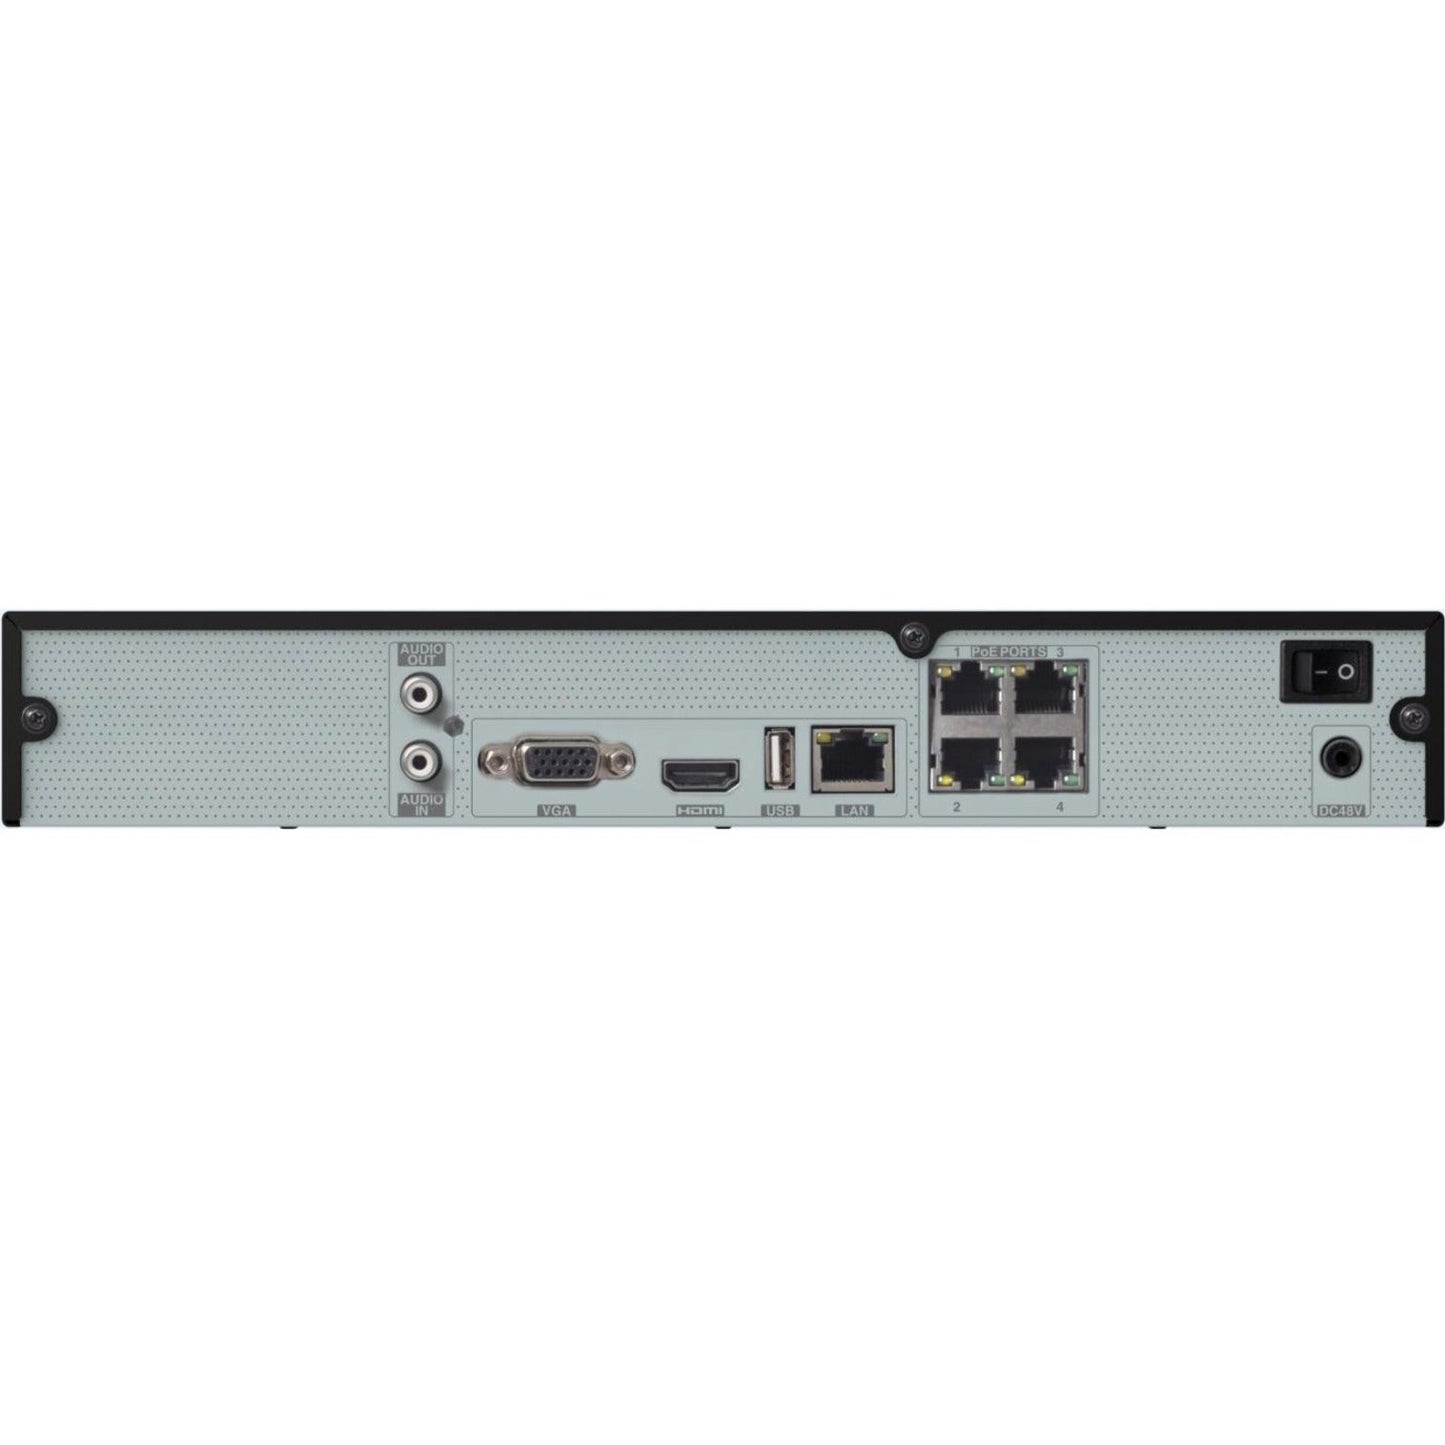 Speco 4 Channel NVR with 4 Built-In PoE Ports - 8 TB HDD